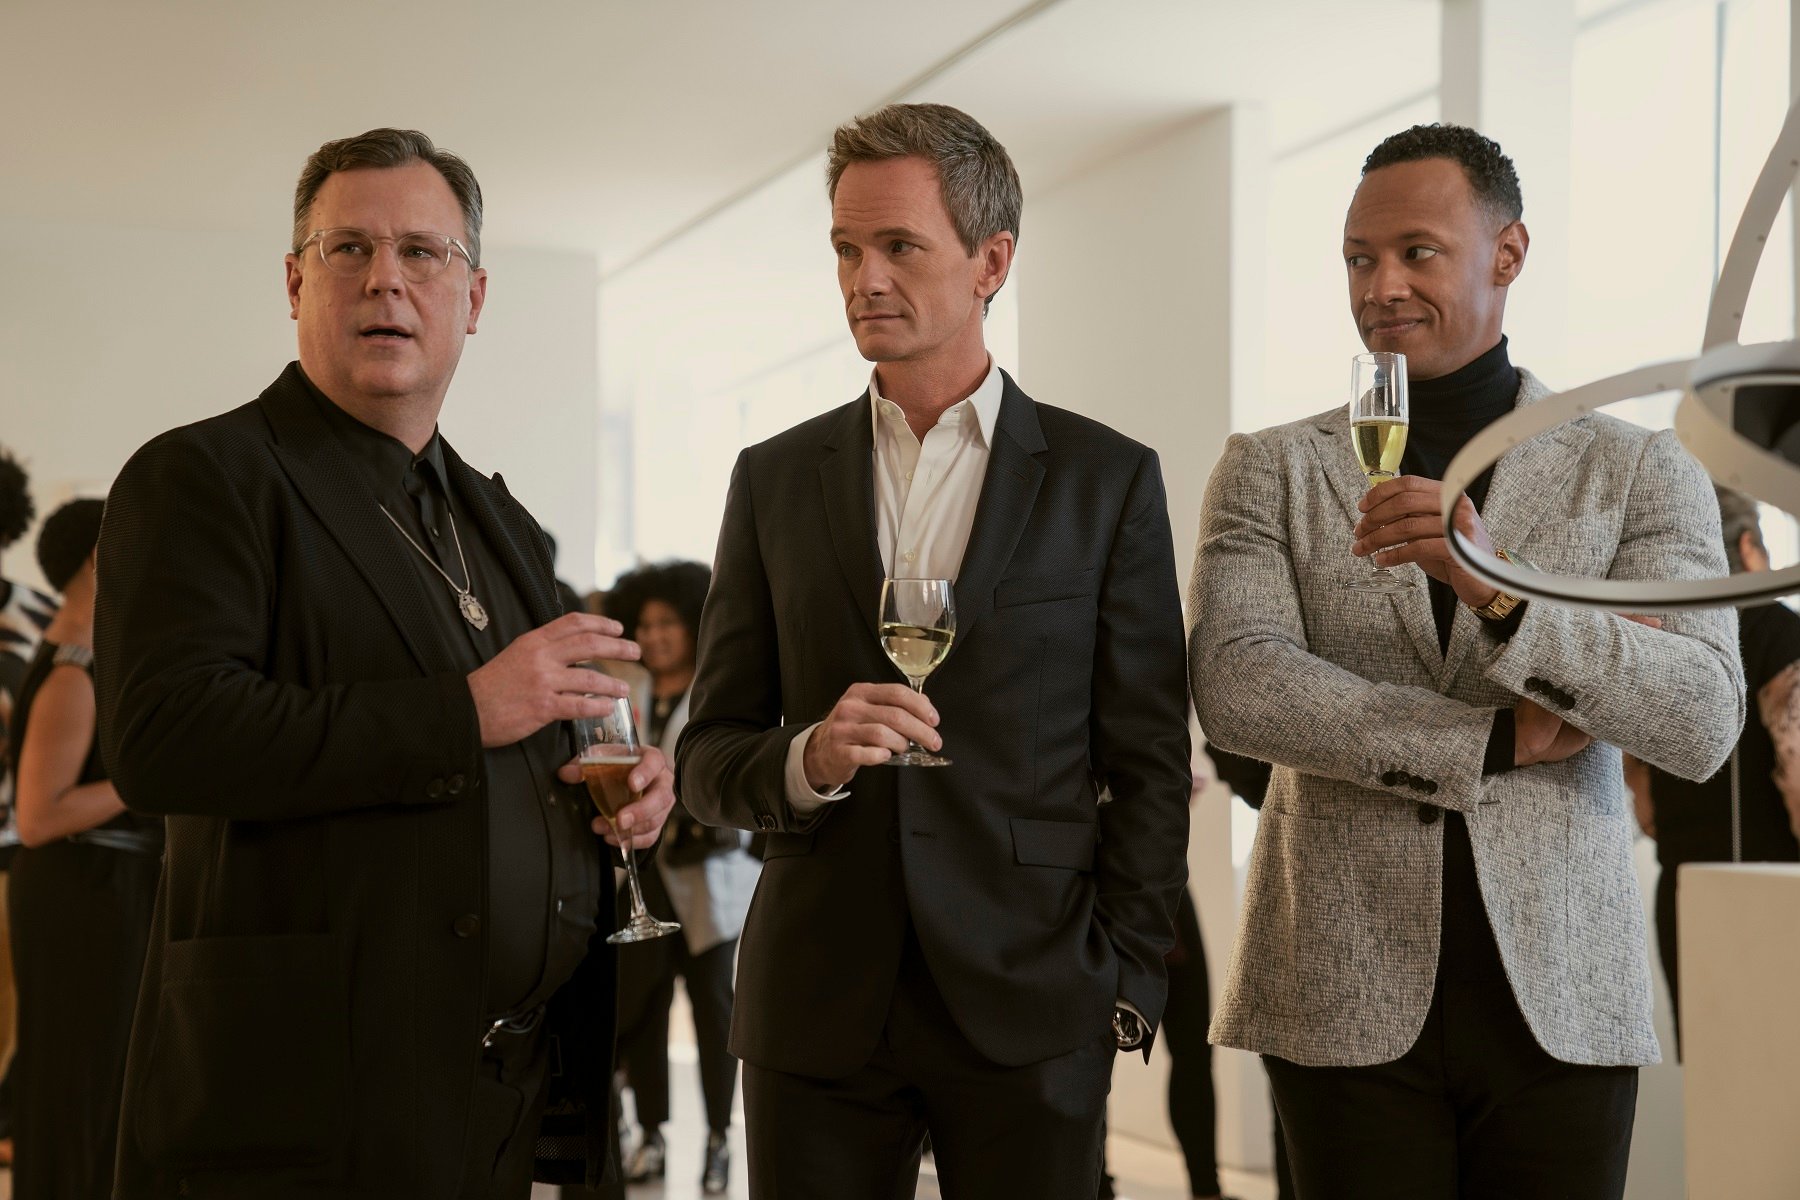 Brooks Ashmanskas as Stanley James, Neil Patrick Harris as Michael Lawson, and Emerson Brooks as Billy Jackson in 'Uncoupled'